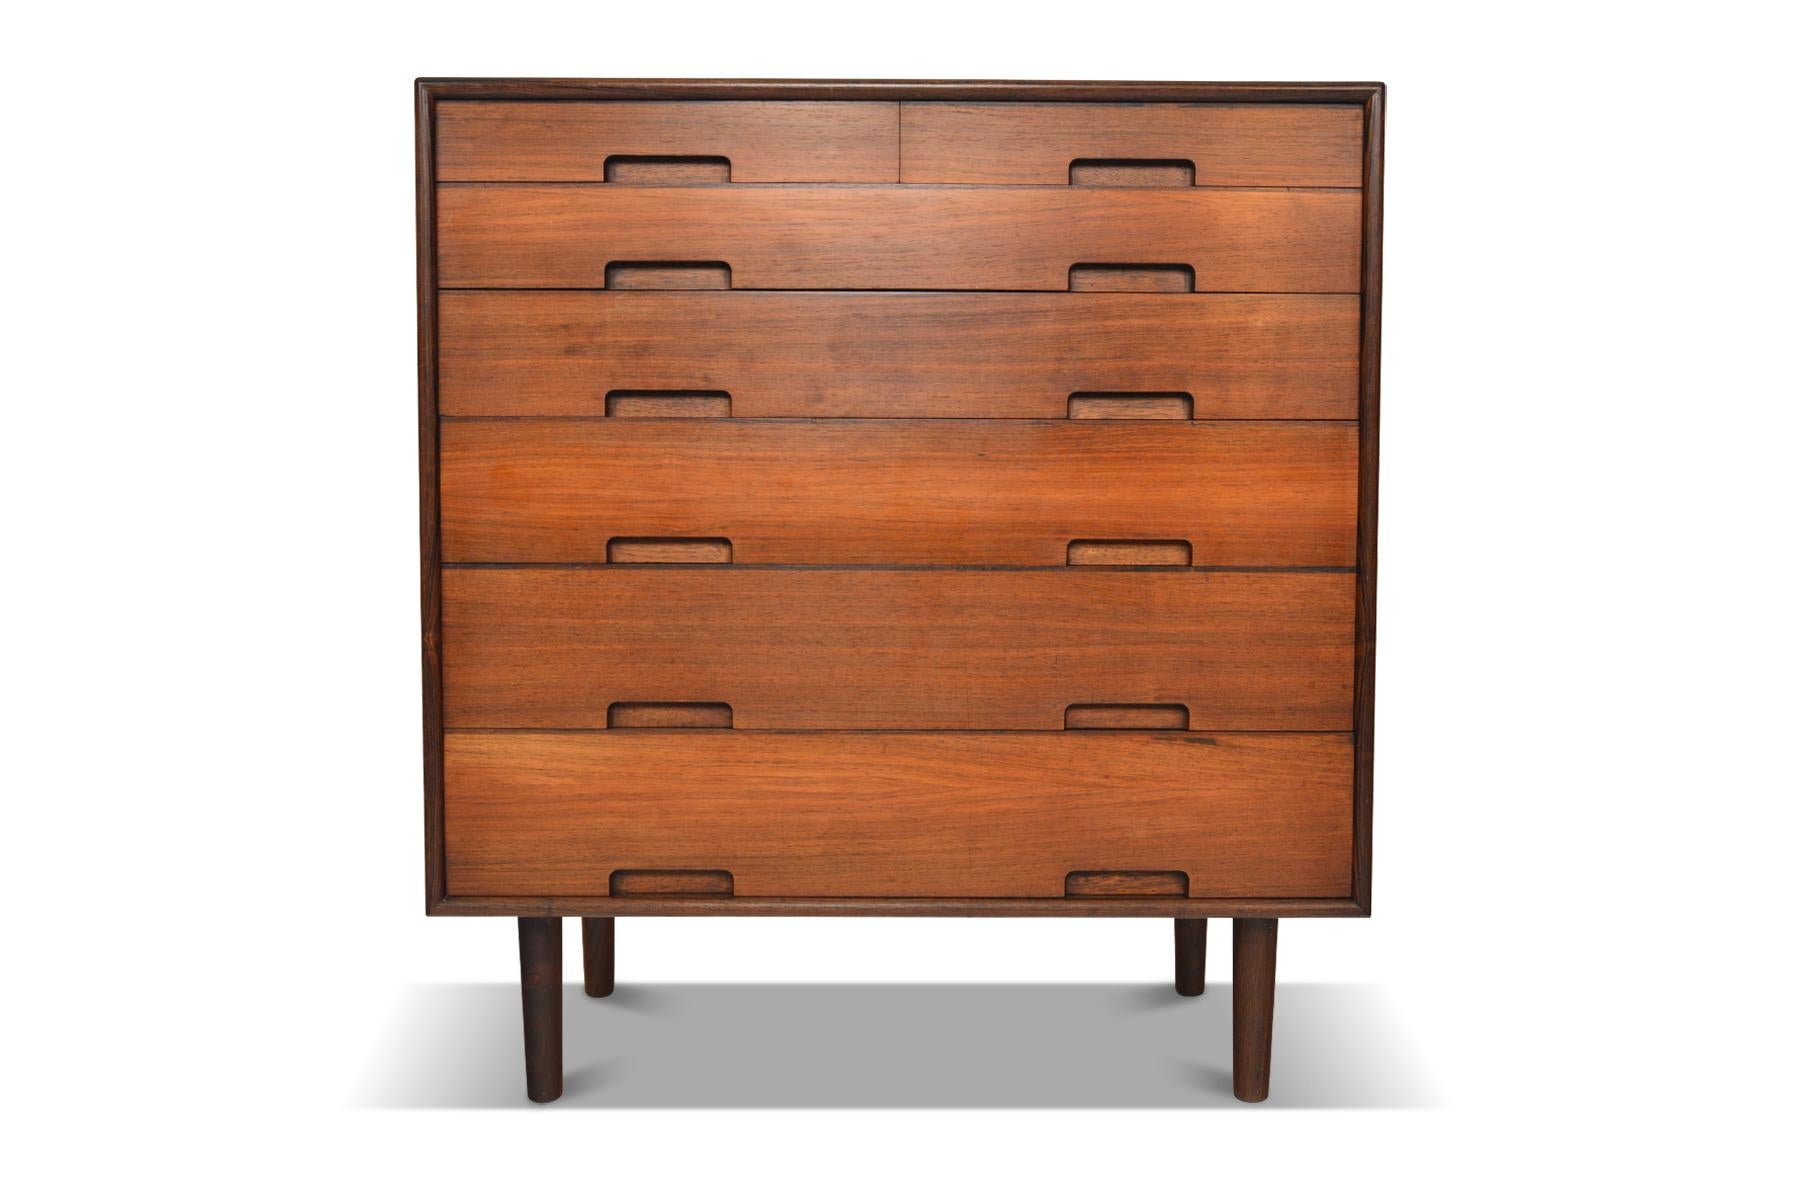 Origin: Denmark
Designer: Unknown
Manufacturer: Unknown
Era: 1960s
Materials: Rosewood
Measurements: 36? wide x 18? deep x 39.5? tall, drawers, 33.5? wide x 15.5? deep x 6? tall.

Condition: In excellent original condition. Price includes